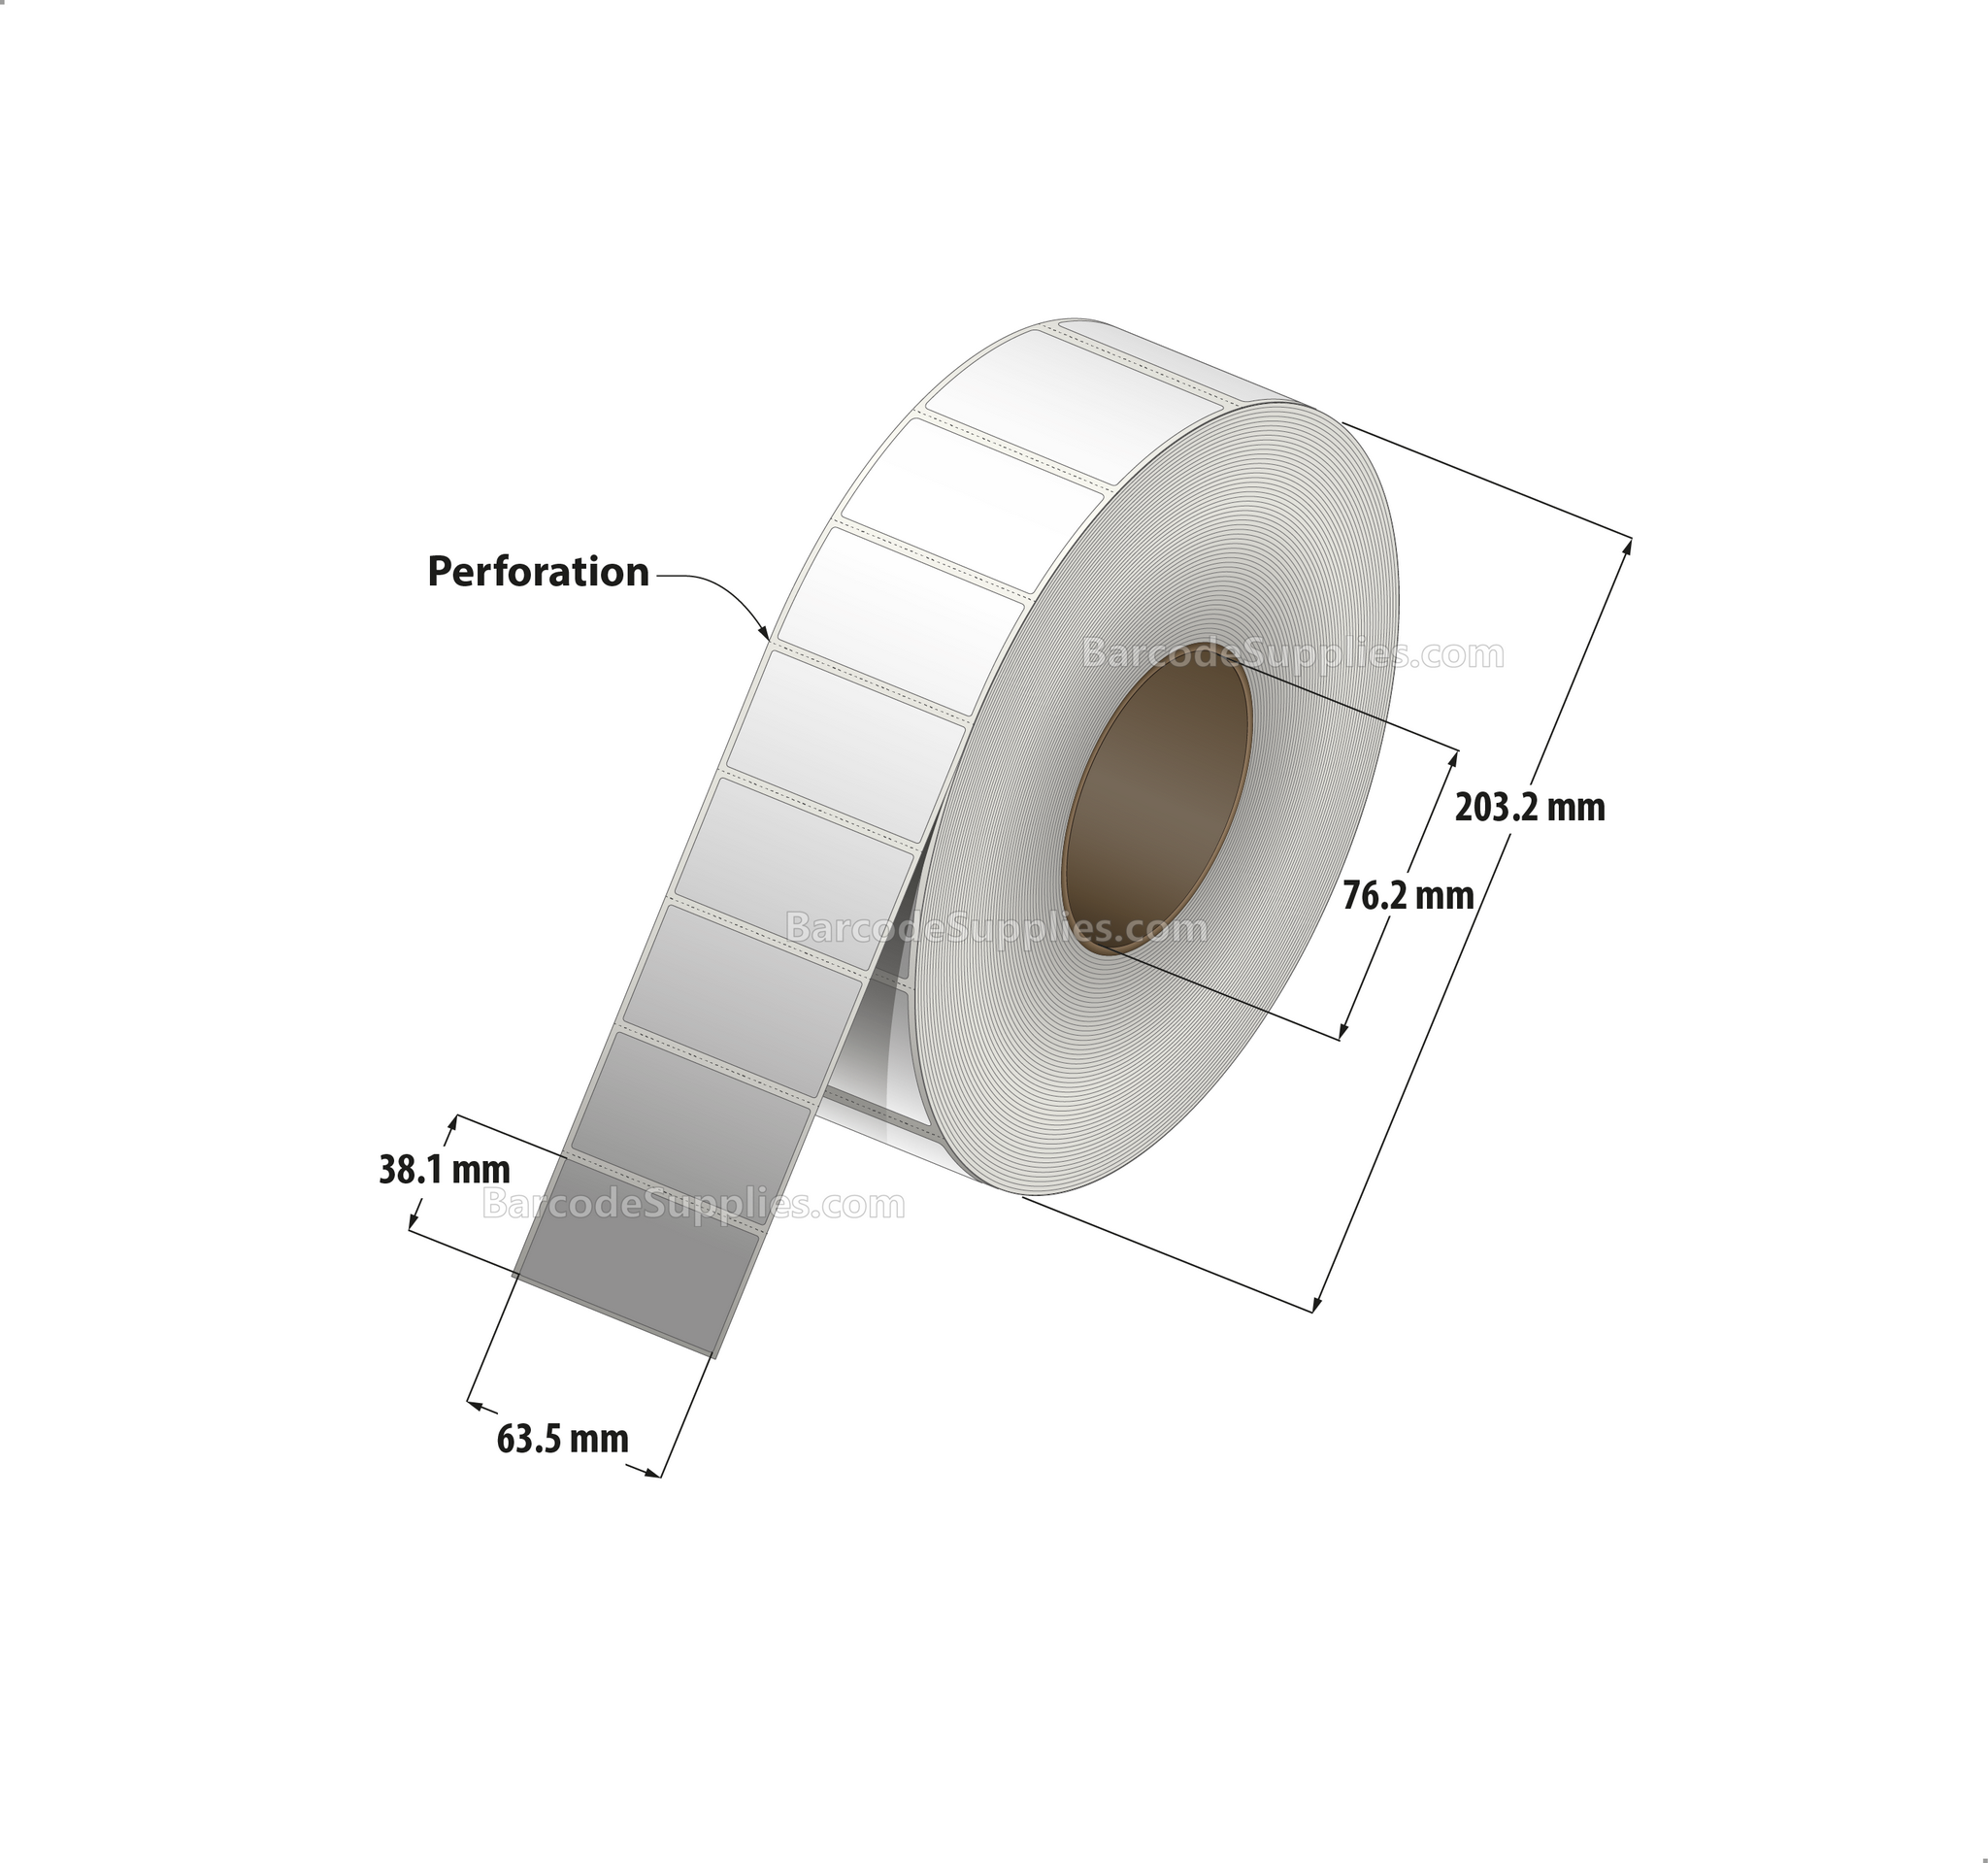 2.5 x 1.5 Thermal Transfer White Labels With Permanent Adhesive - Perforated - 3600 Labels Per Roll - Carton Of 8 Rolls - 28800 Labels Total - MPN: RT-25-15-3600-3